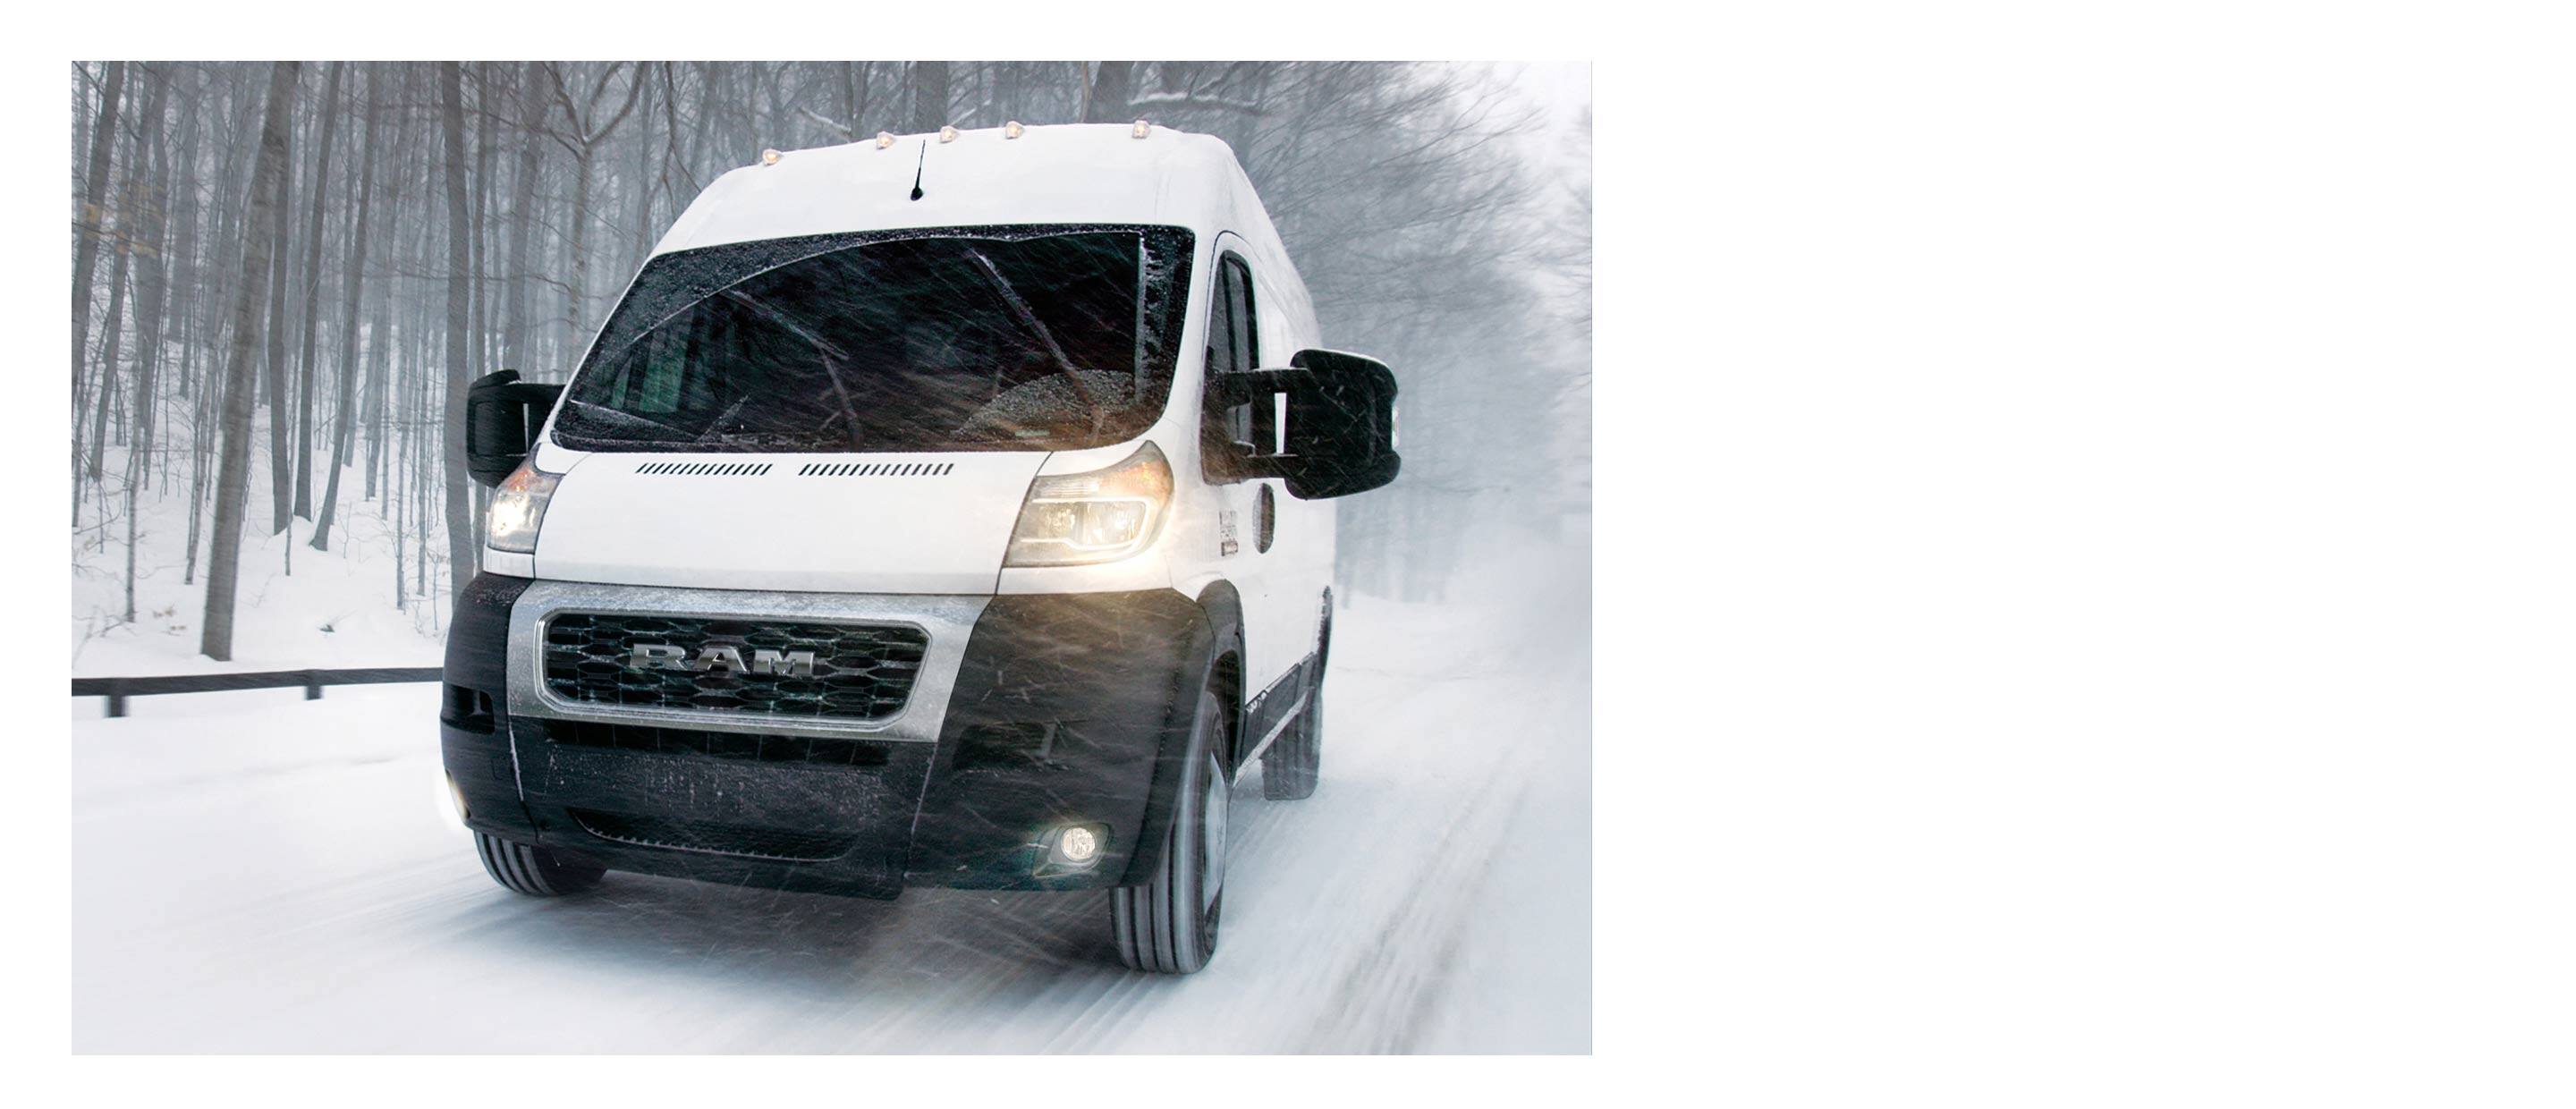 The 2022 Ram ProMaster being driven through blowing snow with its wipers activated.